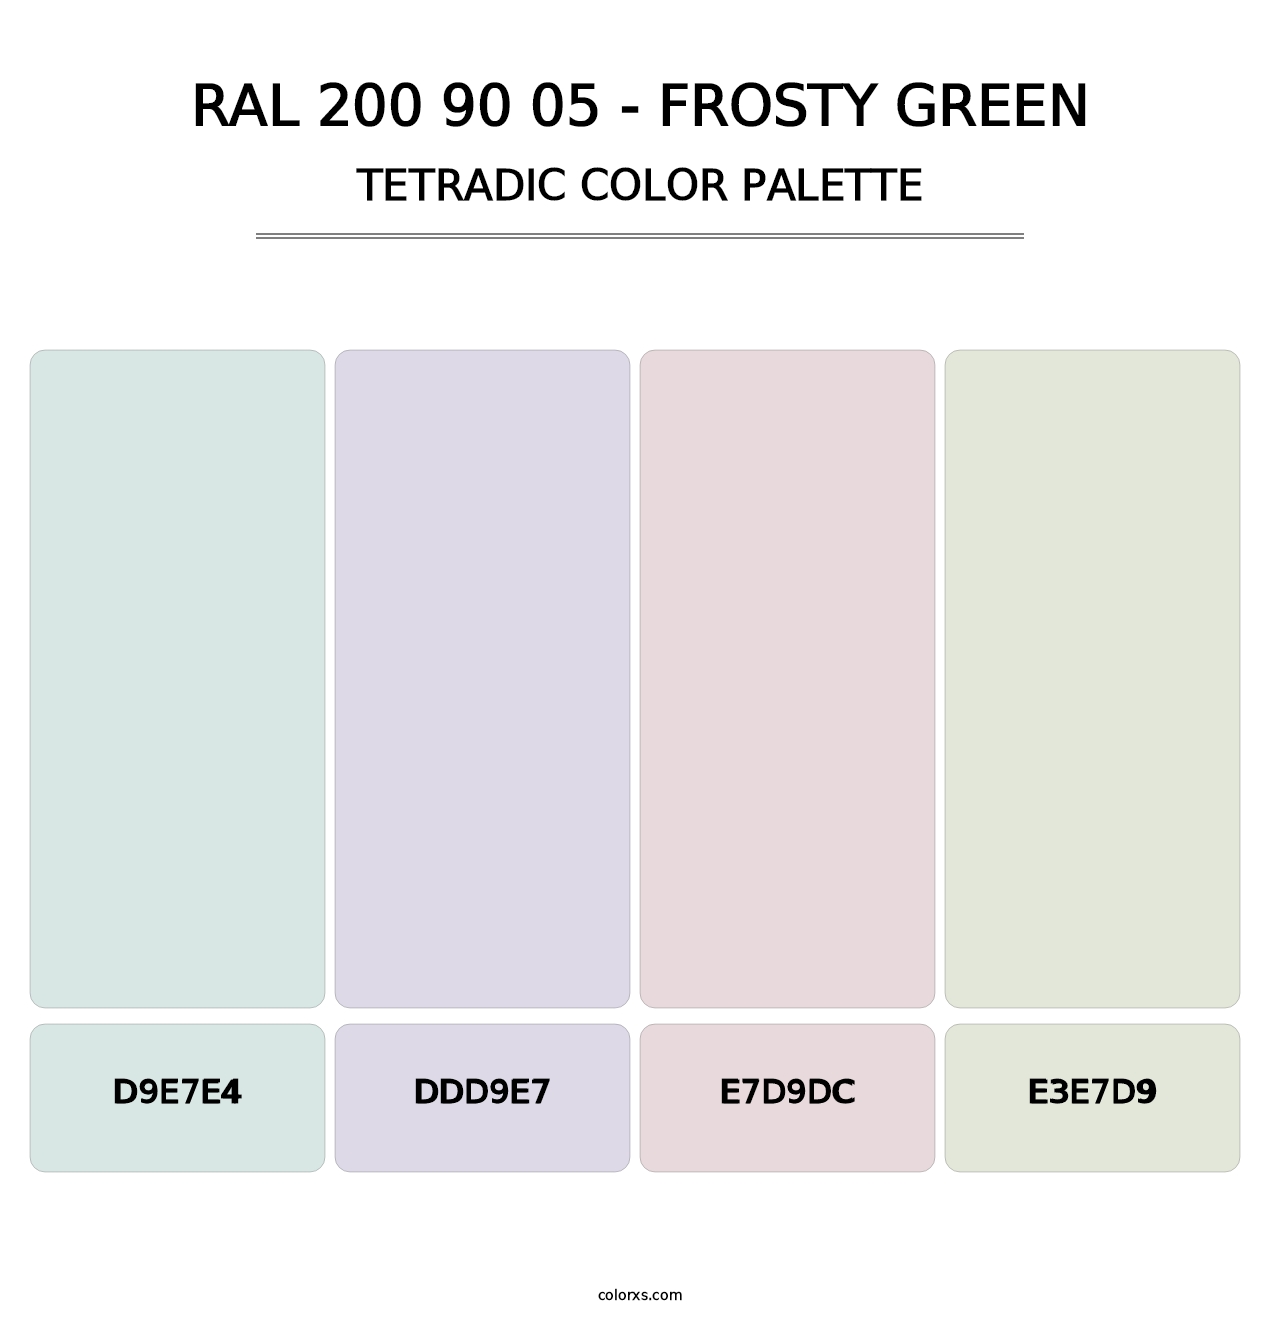 RAL 200 90 05 - Frosty Green - Tetradic Color Palette